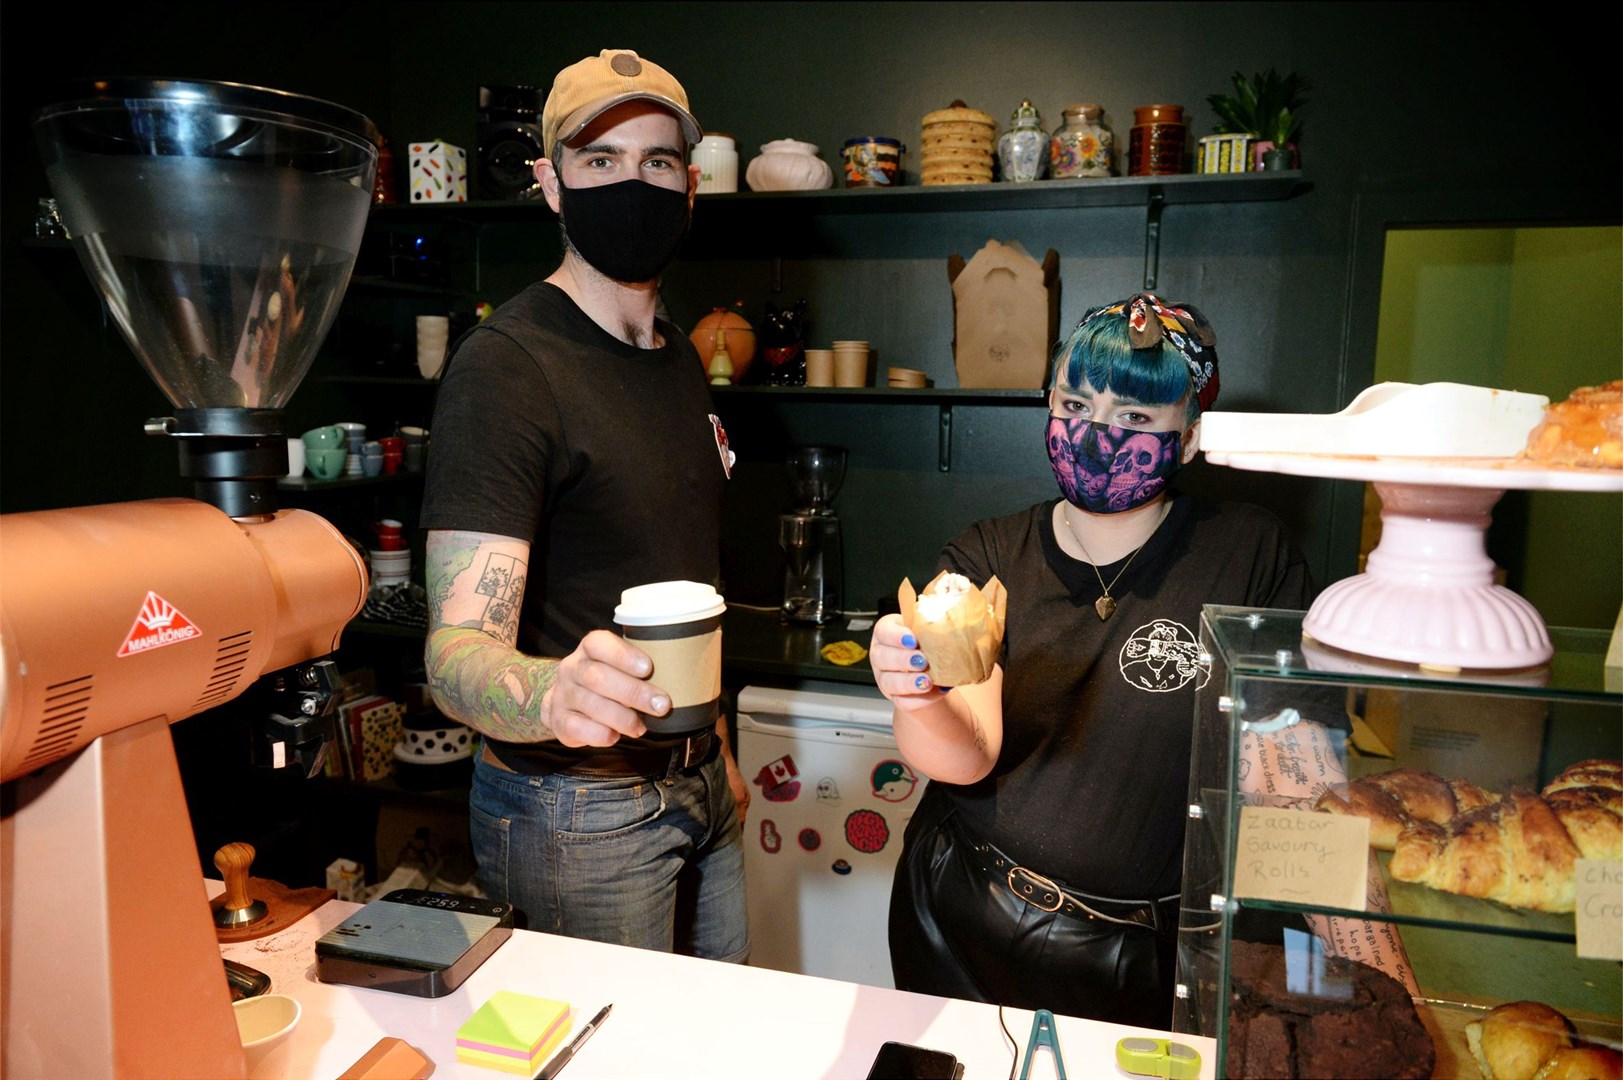 Jordan Milliken and Ruth Cole, who aim to tantalise the taste buds of people in the county town, opened for business on Saturday having mulled their plan during lockdown. Picture: James Mackenzie.